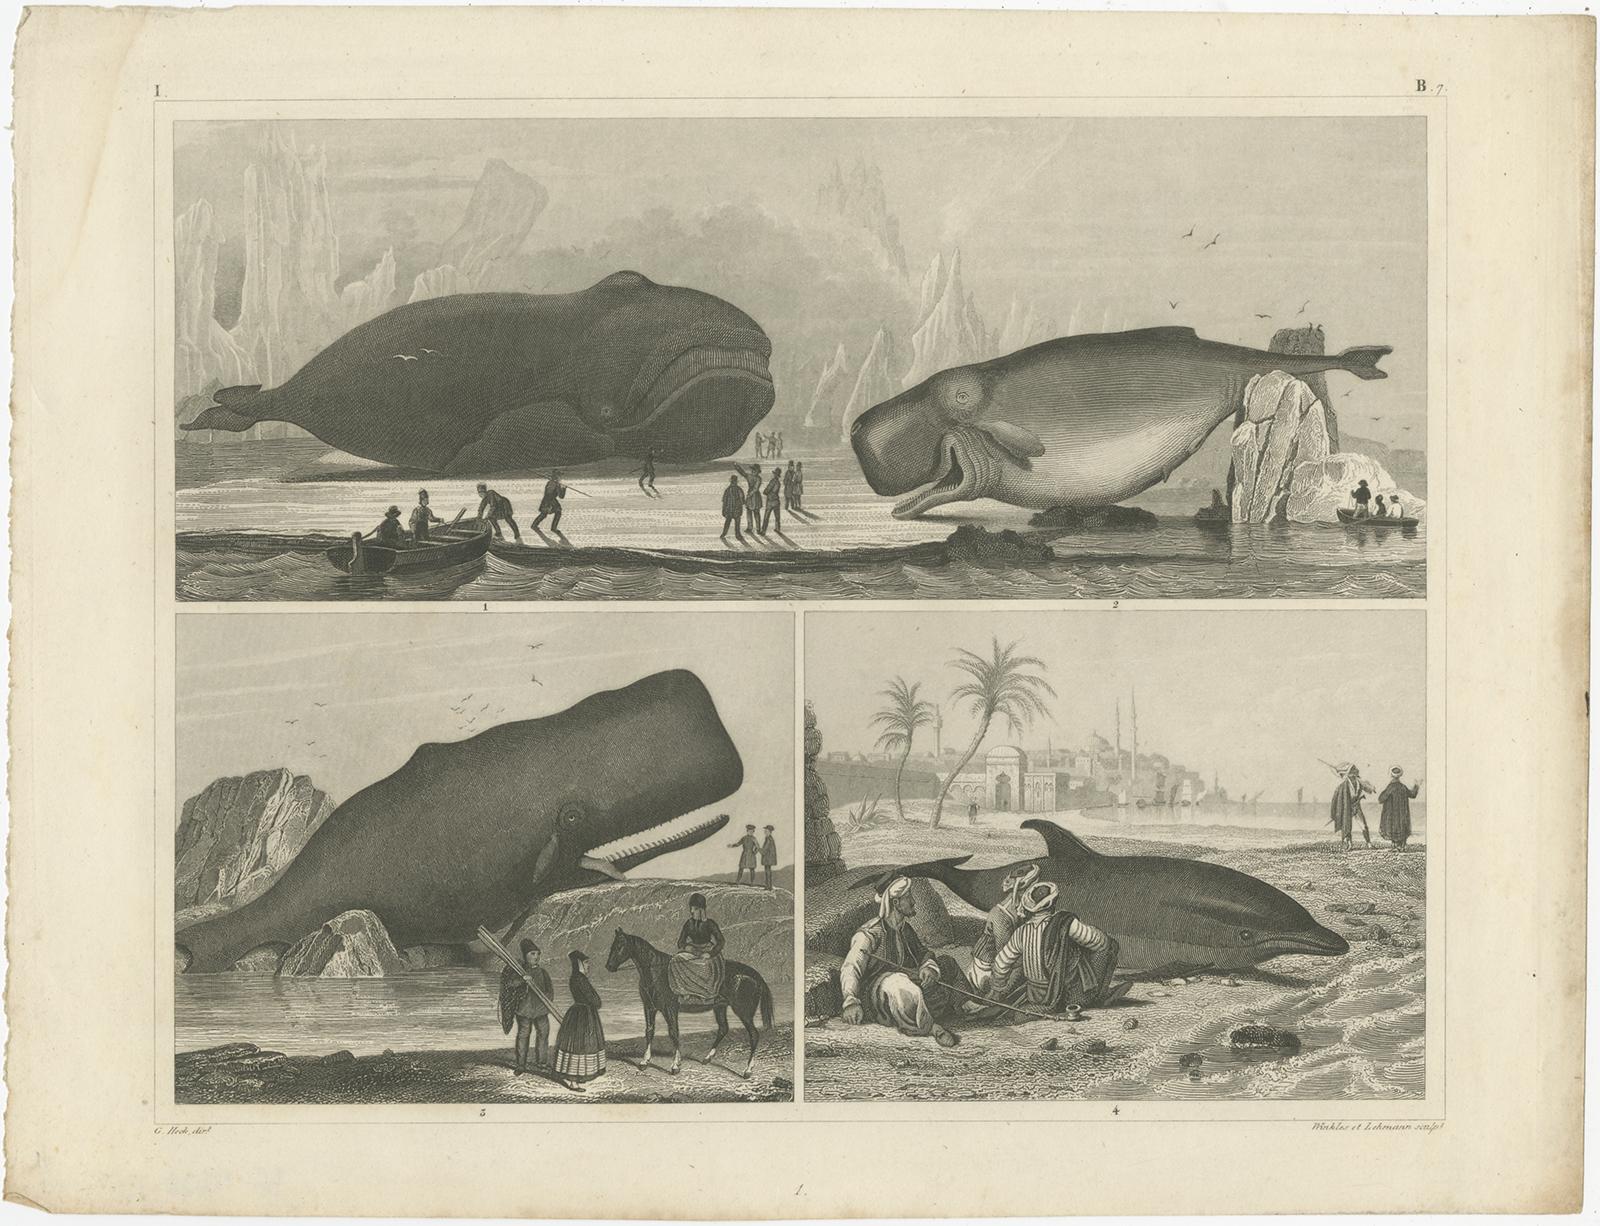 Set of four antique prints of various marine life and fossils. These prints originate from 'Bilder-Atlas zum Conversations-Lexikon' by Johann George Heck. Published circa 1850.